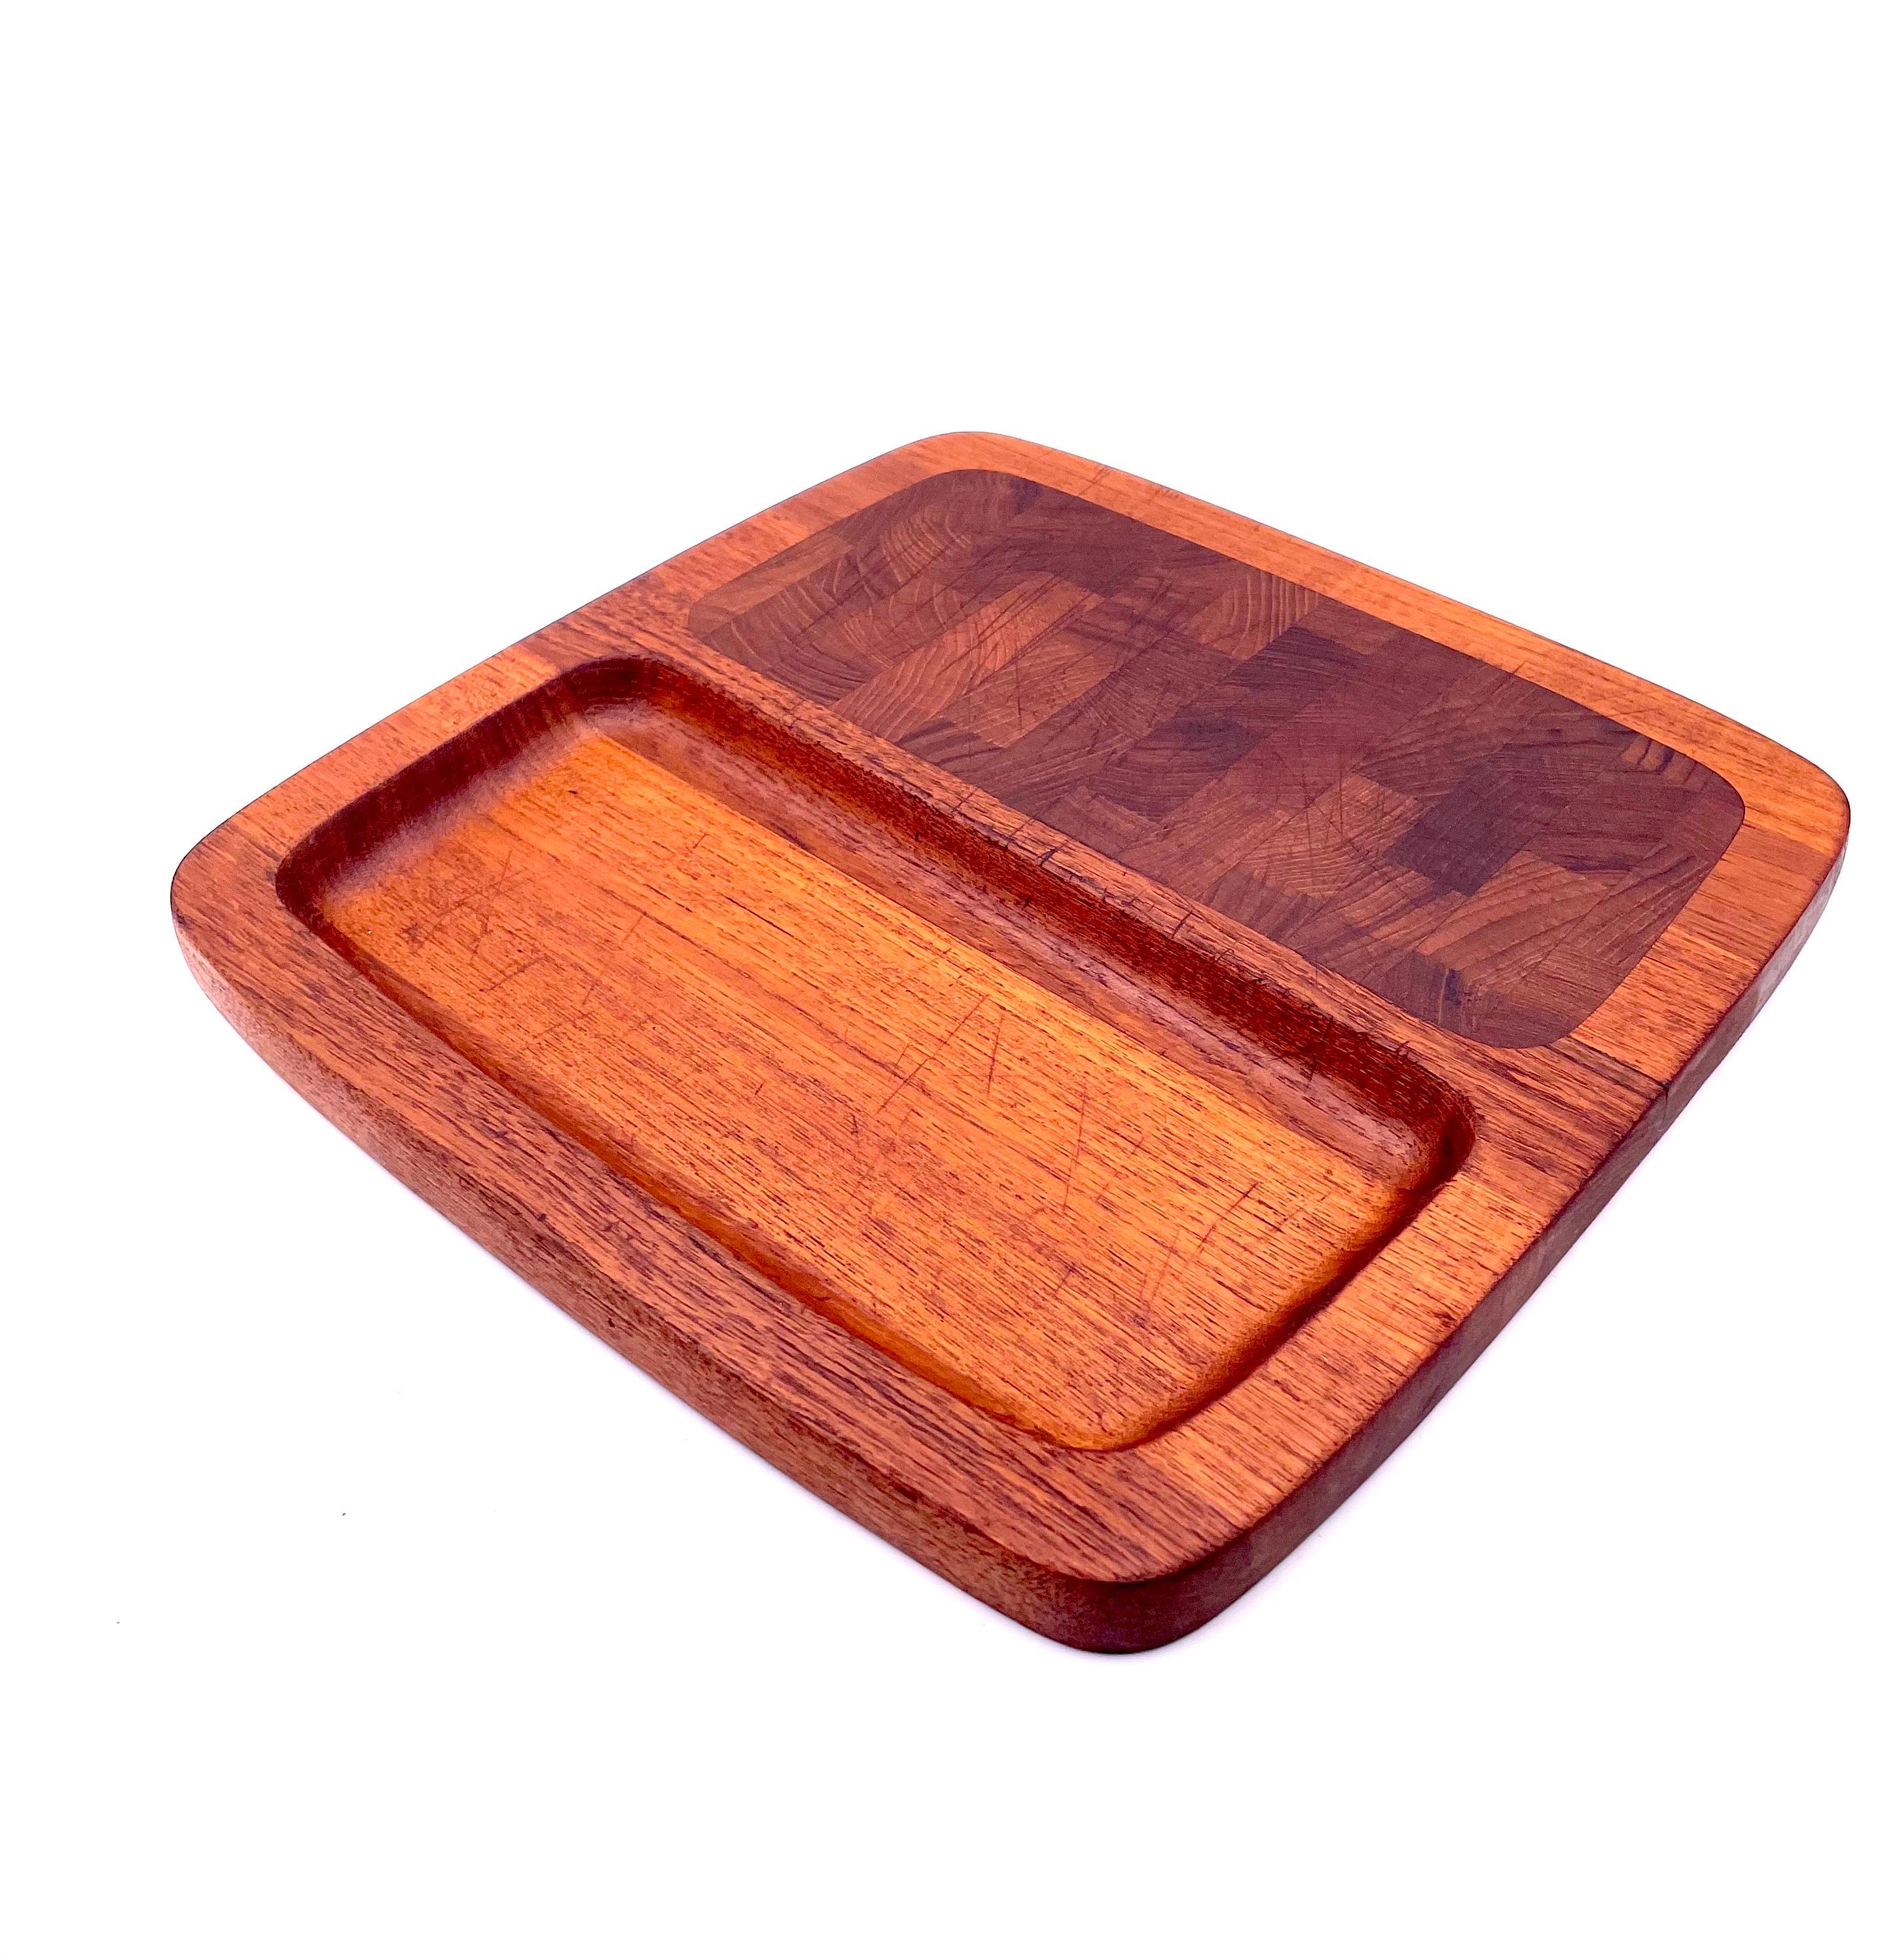 Great design on this solid teak tray designed by Quistgaard for Dansk, circa the 1950s, and butcher block side good condition. Early production made in Denmark.